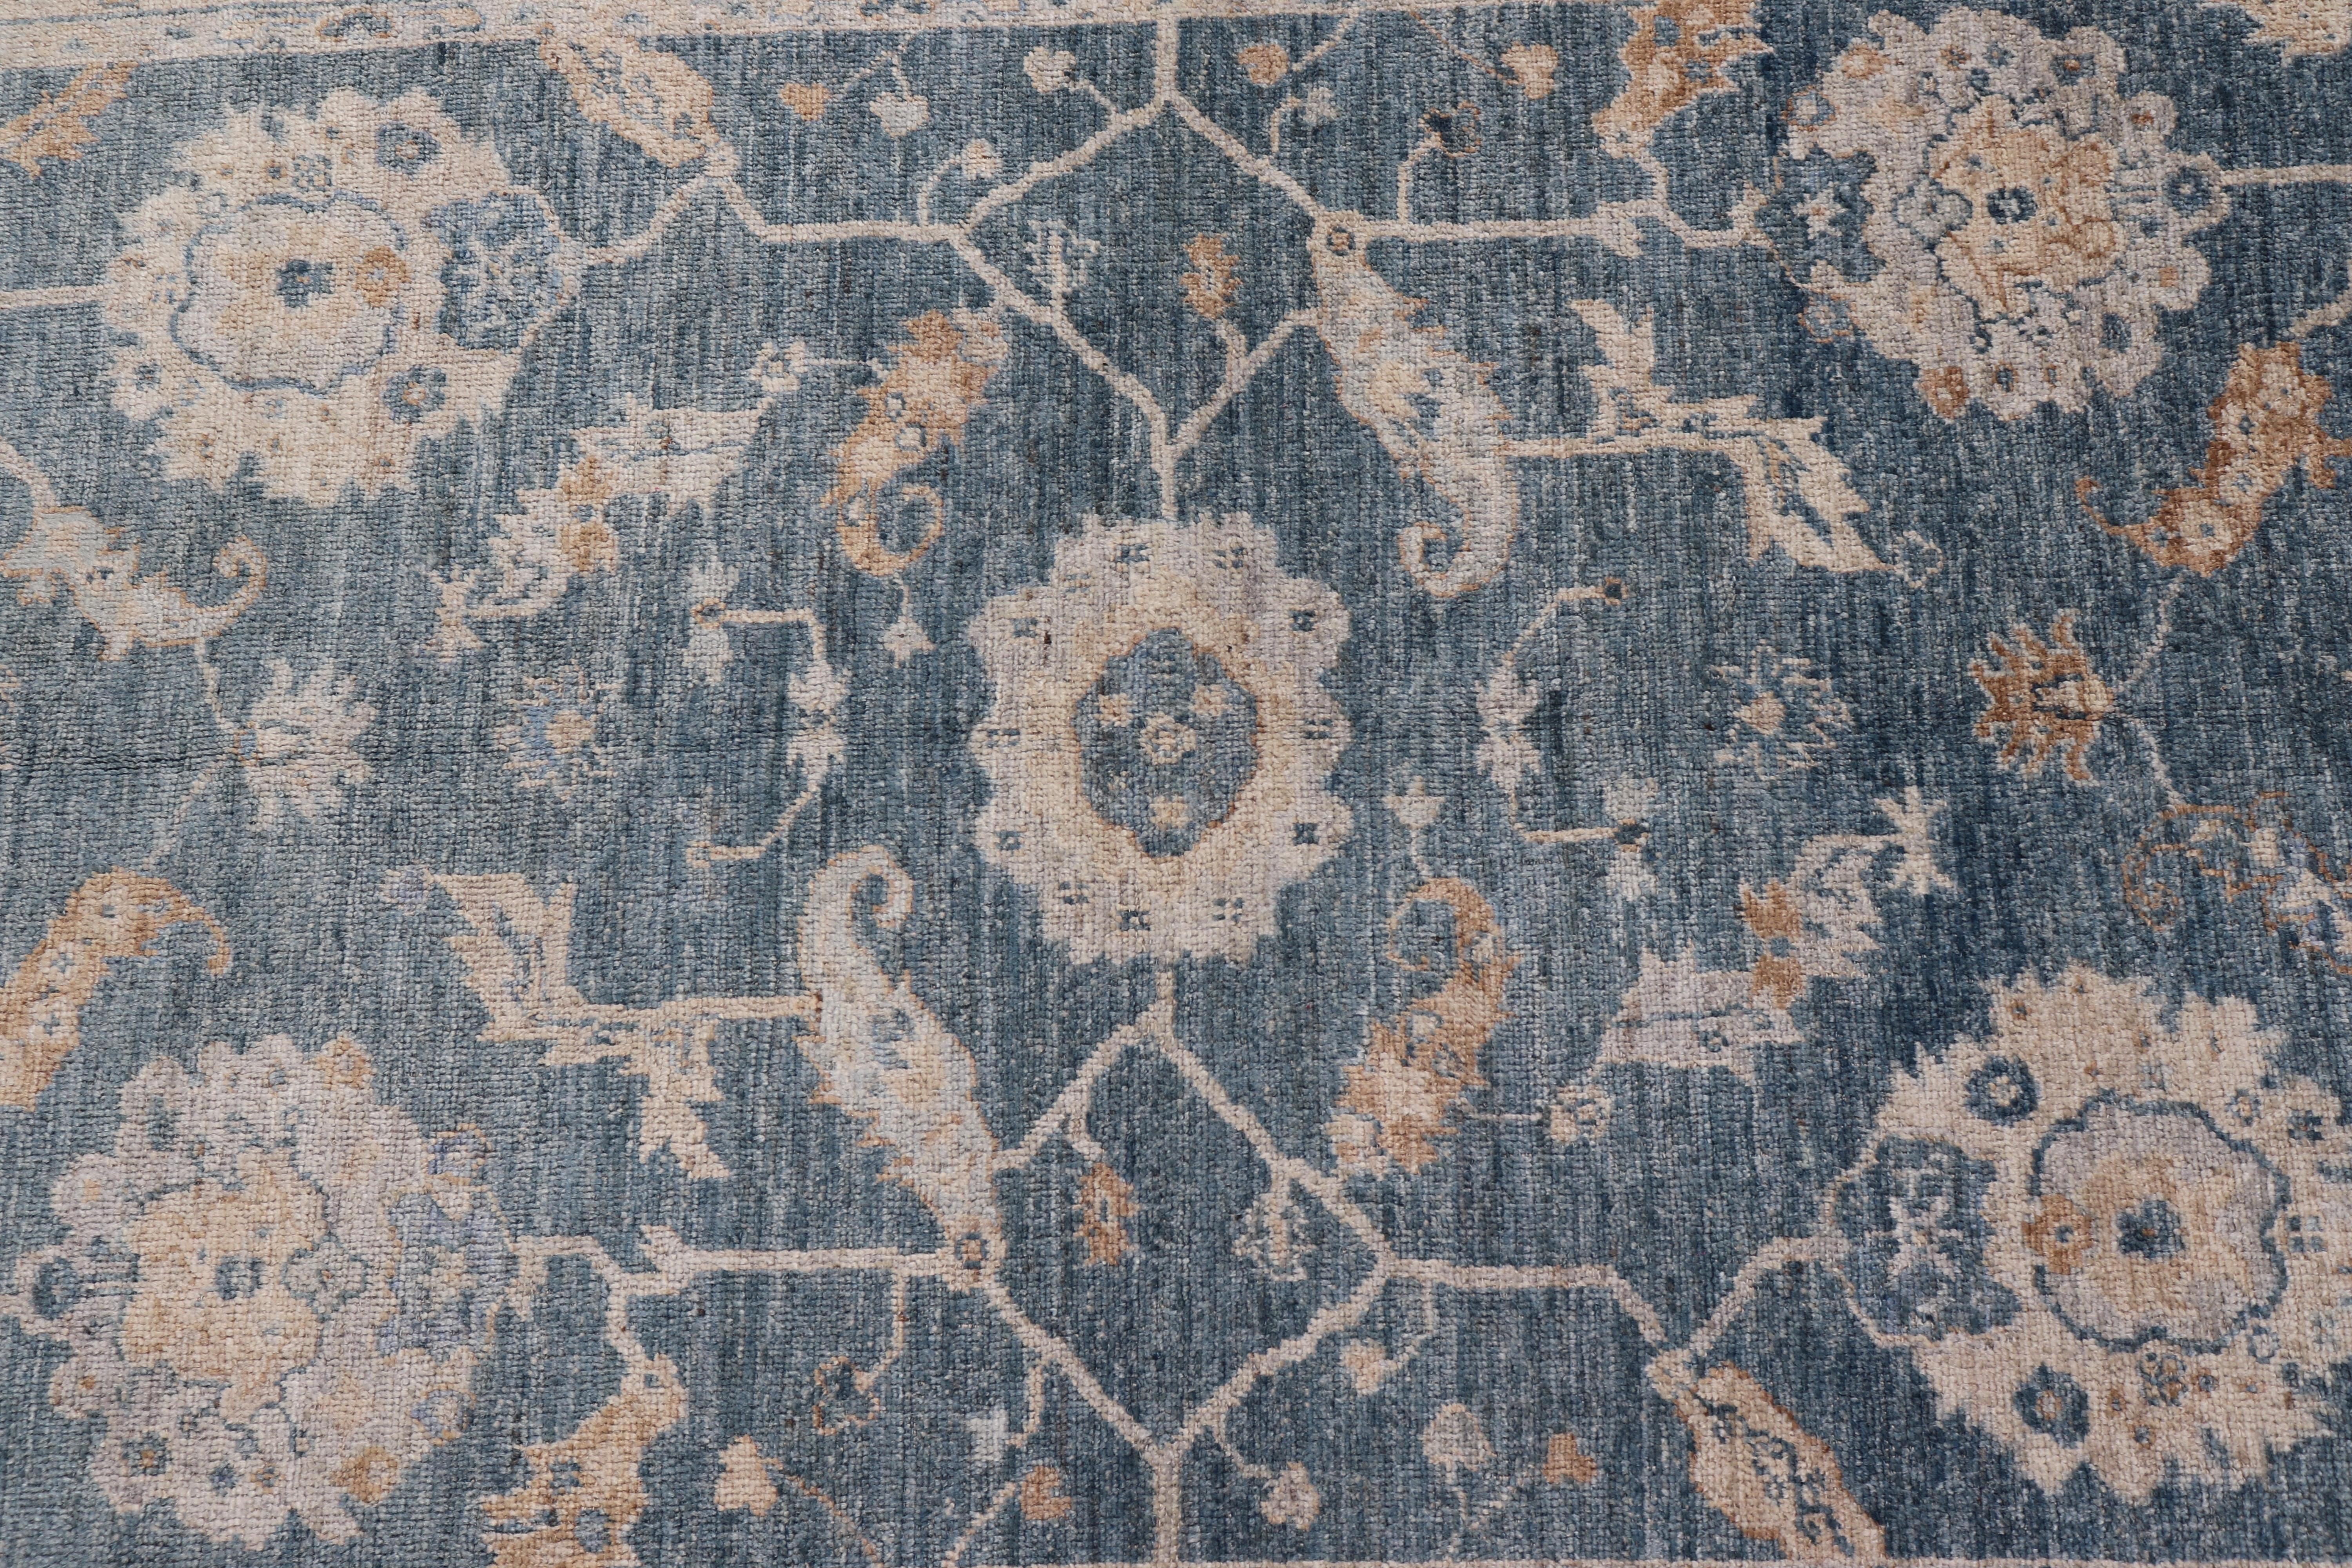 Contemporary Angora Turkish Oushak Floral Design in Blue, Creams and Mocha Colors For Sale